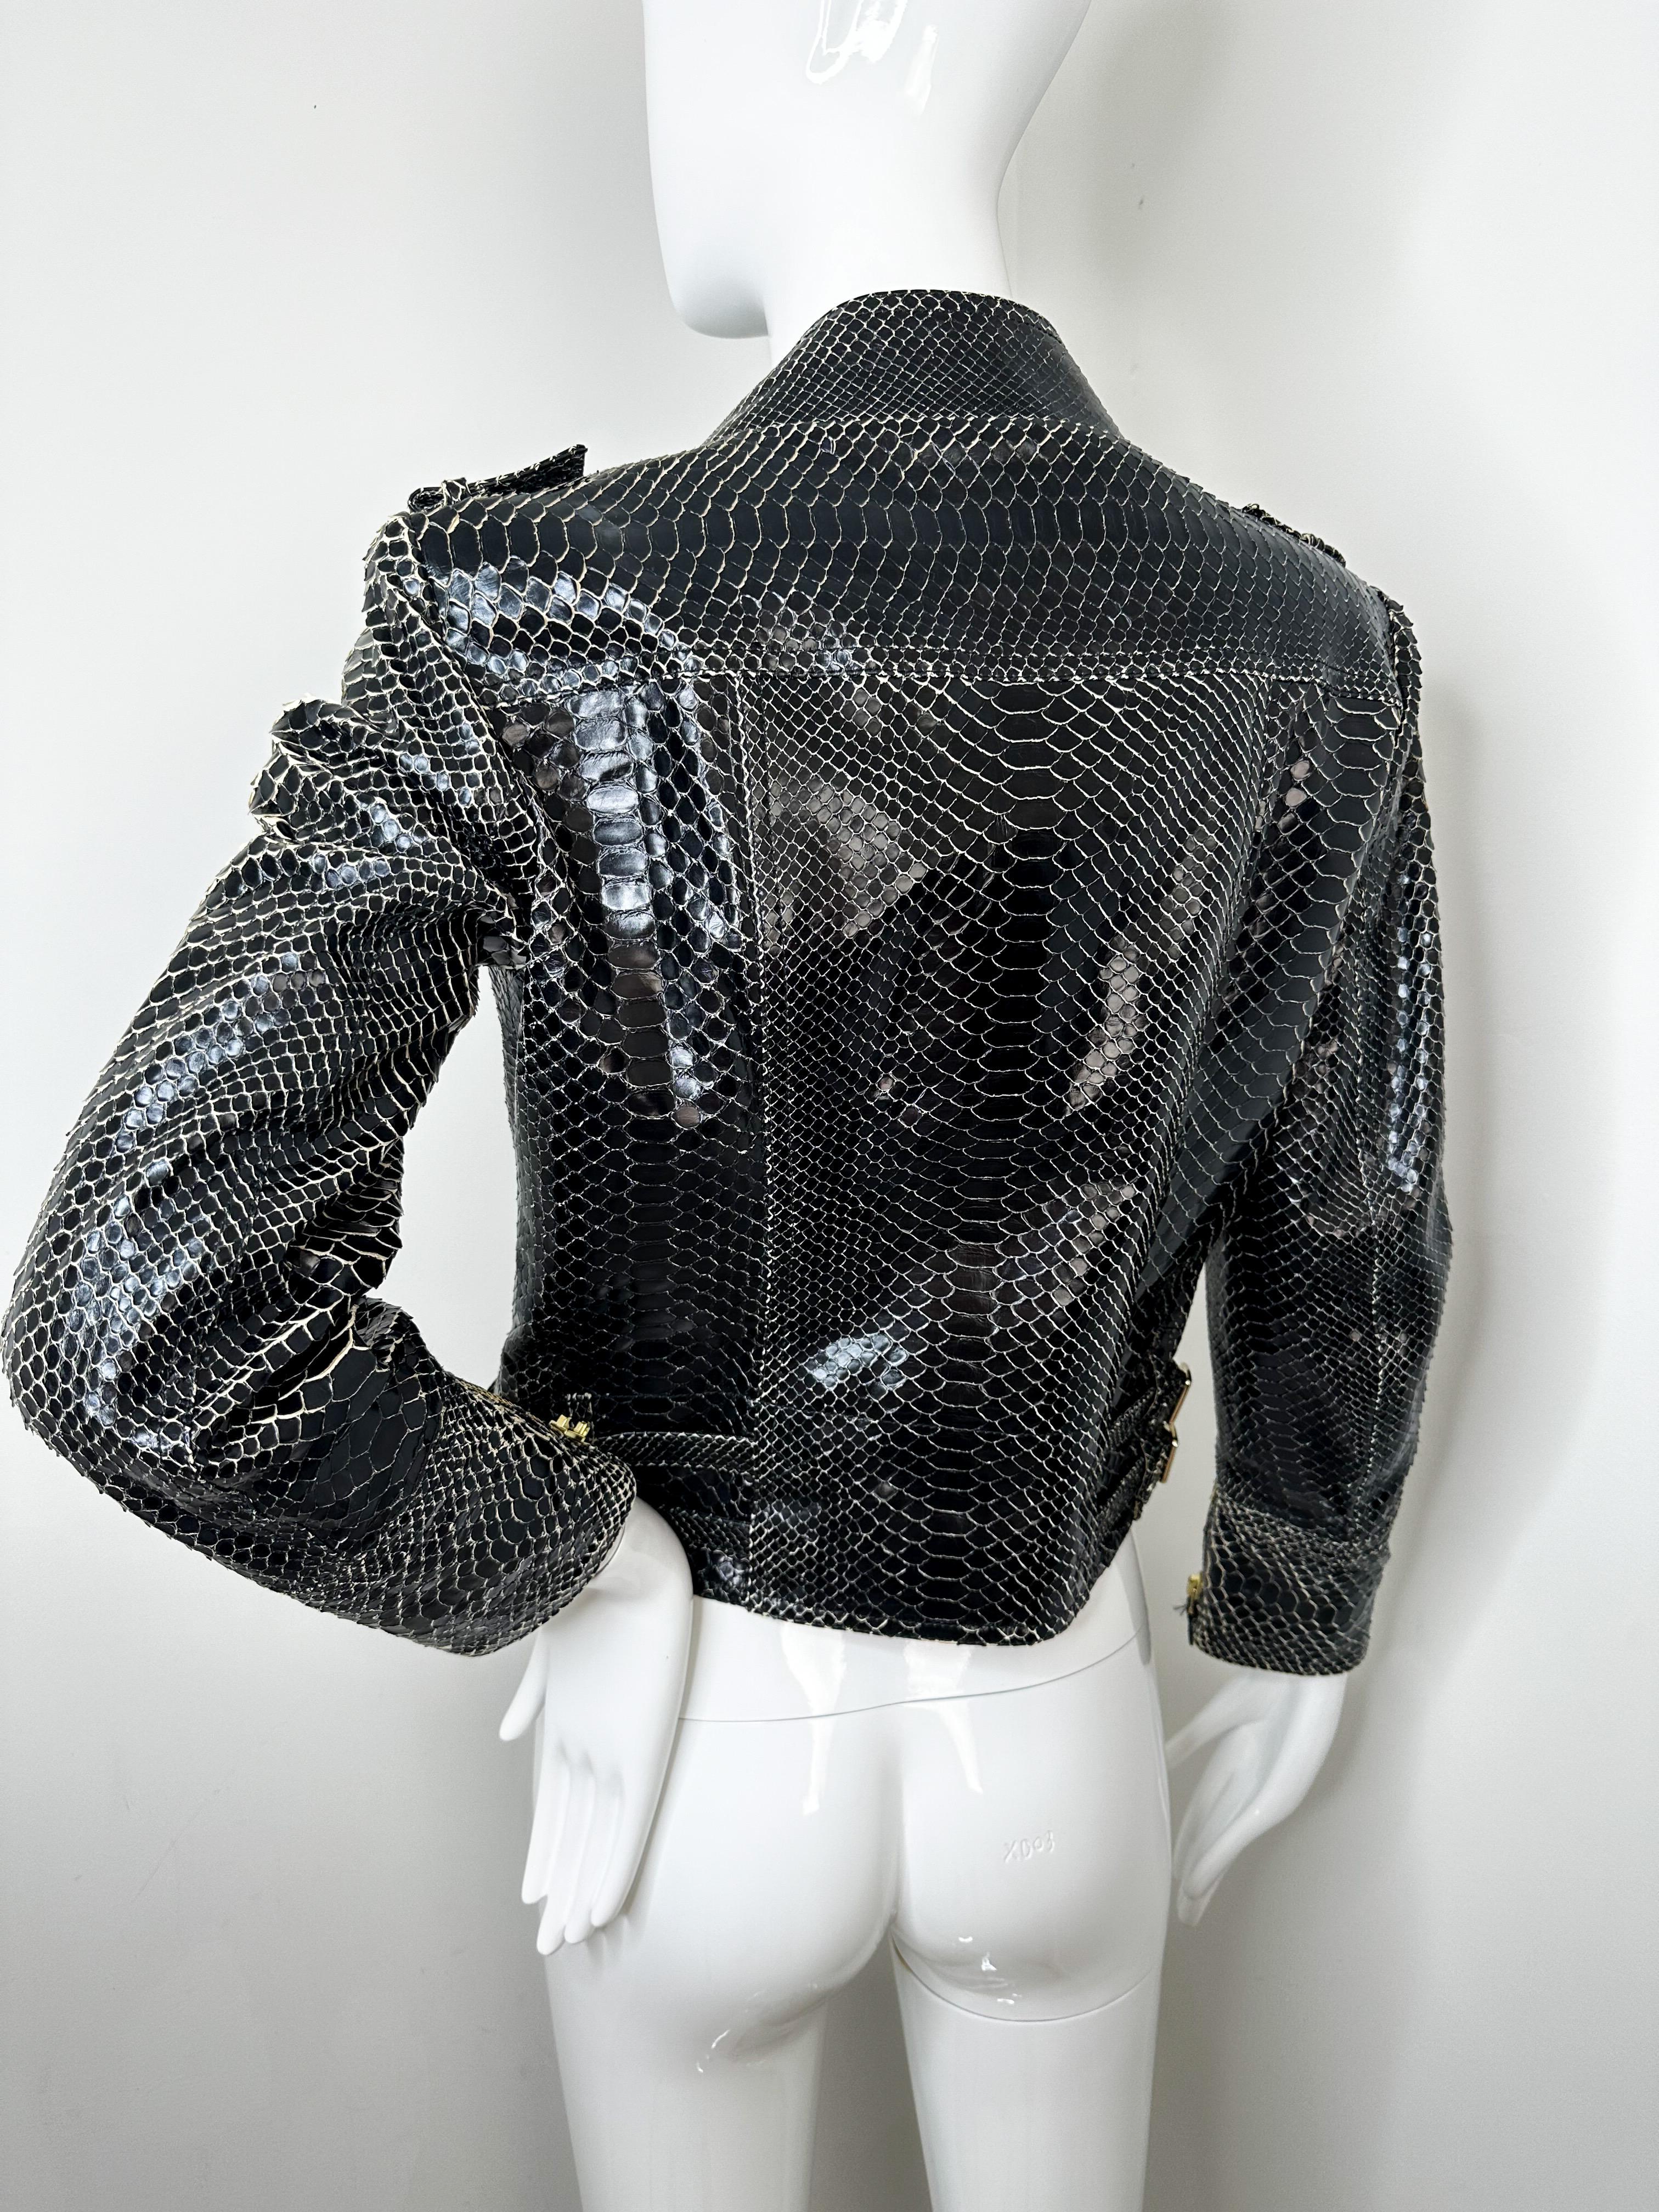 Gucci black snakeskin leather jacket  In Good Condition For Sale In Annandale, VA